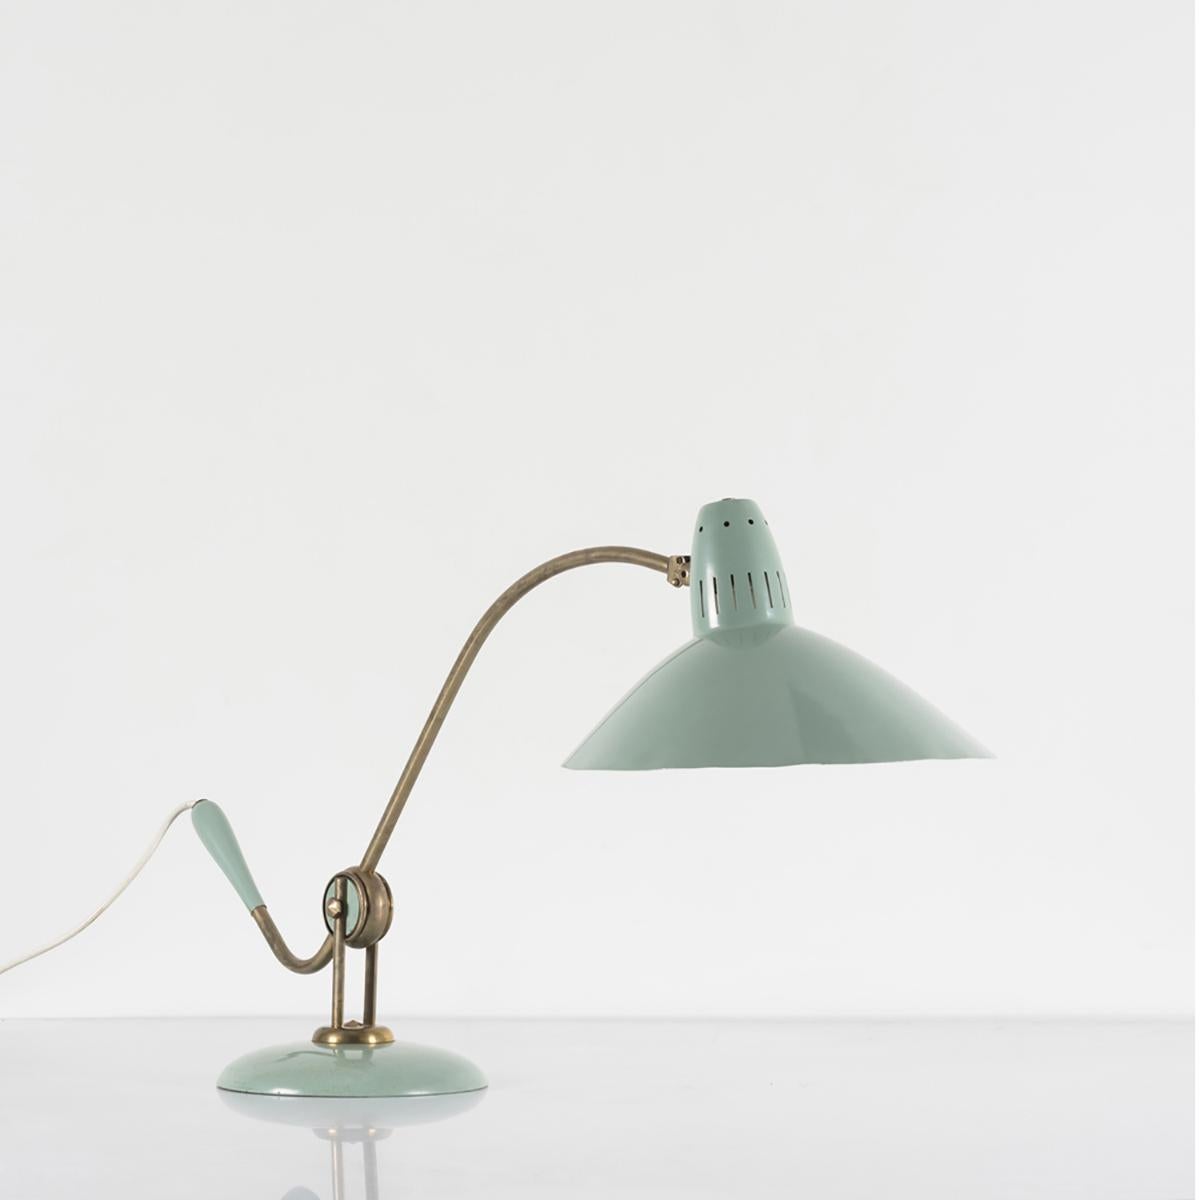 Mint green sculptural desk lamp, enamelled metal, wood and brass, France, 1950's

This desk lamp is as elegant as it is functional. It's unusual color, graceful lines and masterful proportions are remarkable and unusual. Skillfully made and deftly